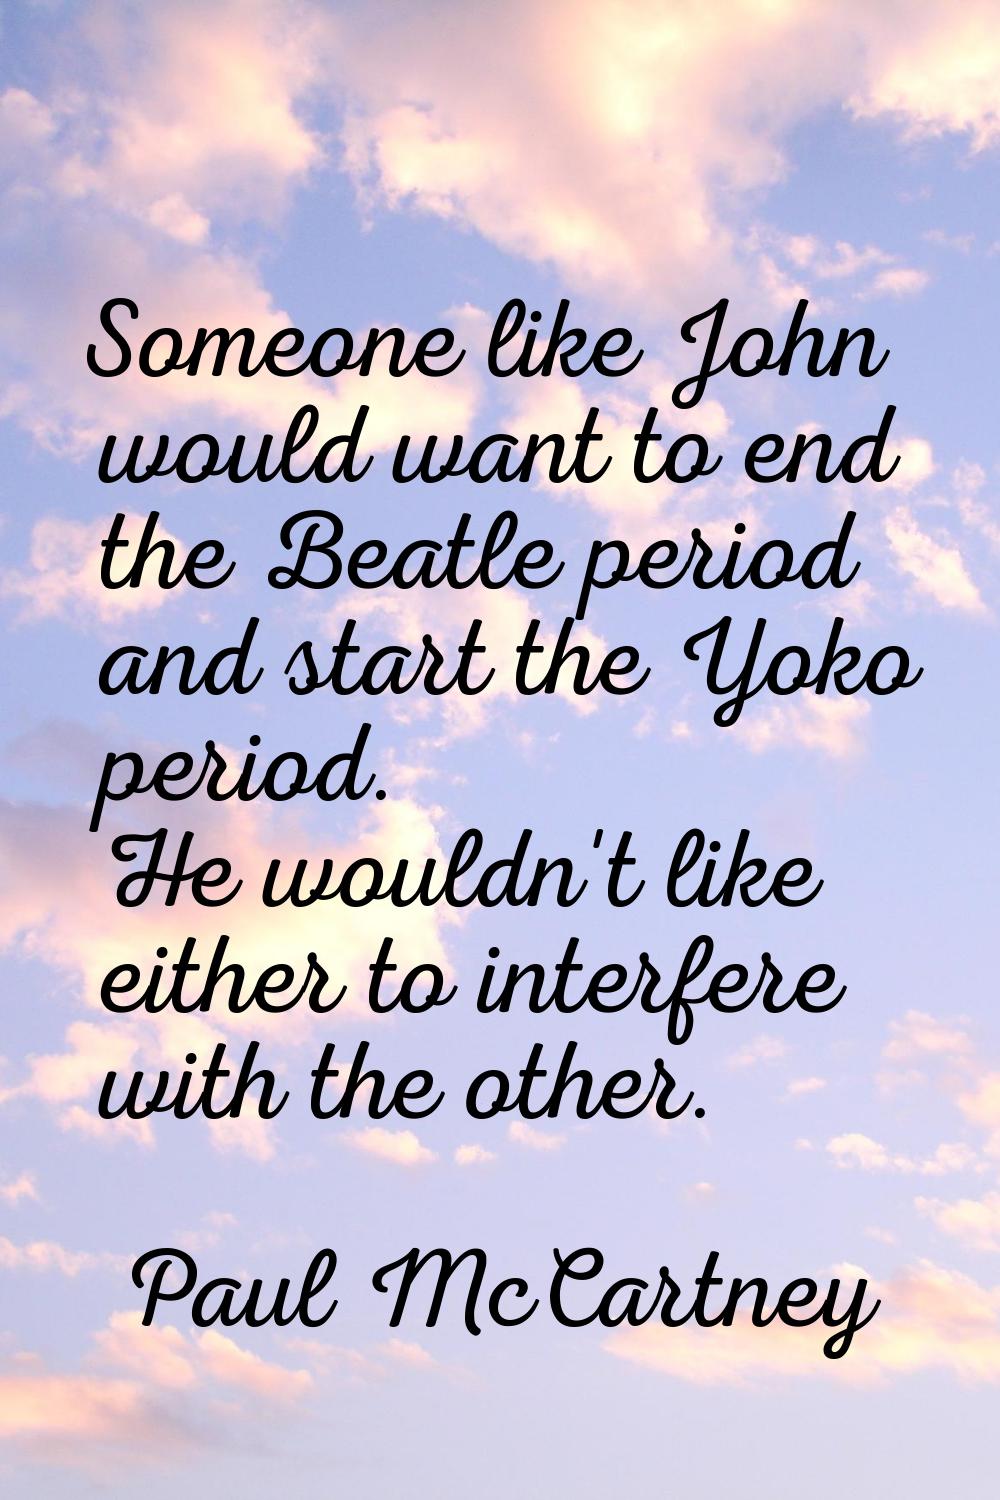 Someone like John would want to end the Beatle period and start the Yoko period. He wouldn't like e